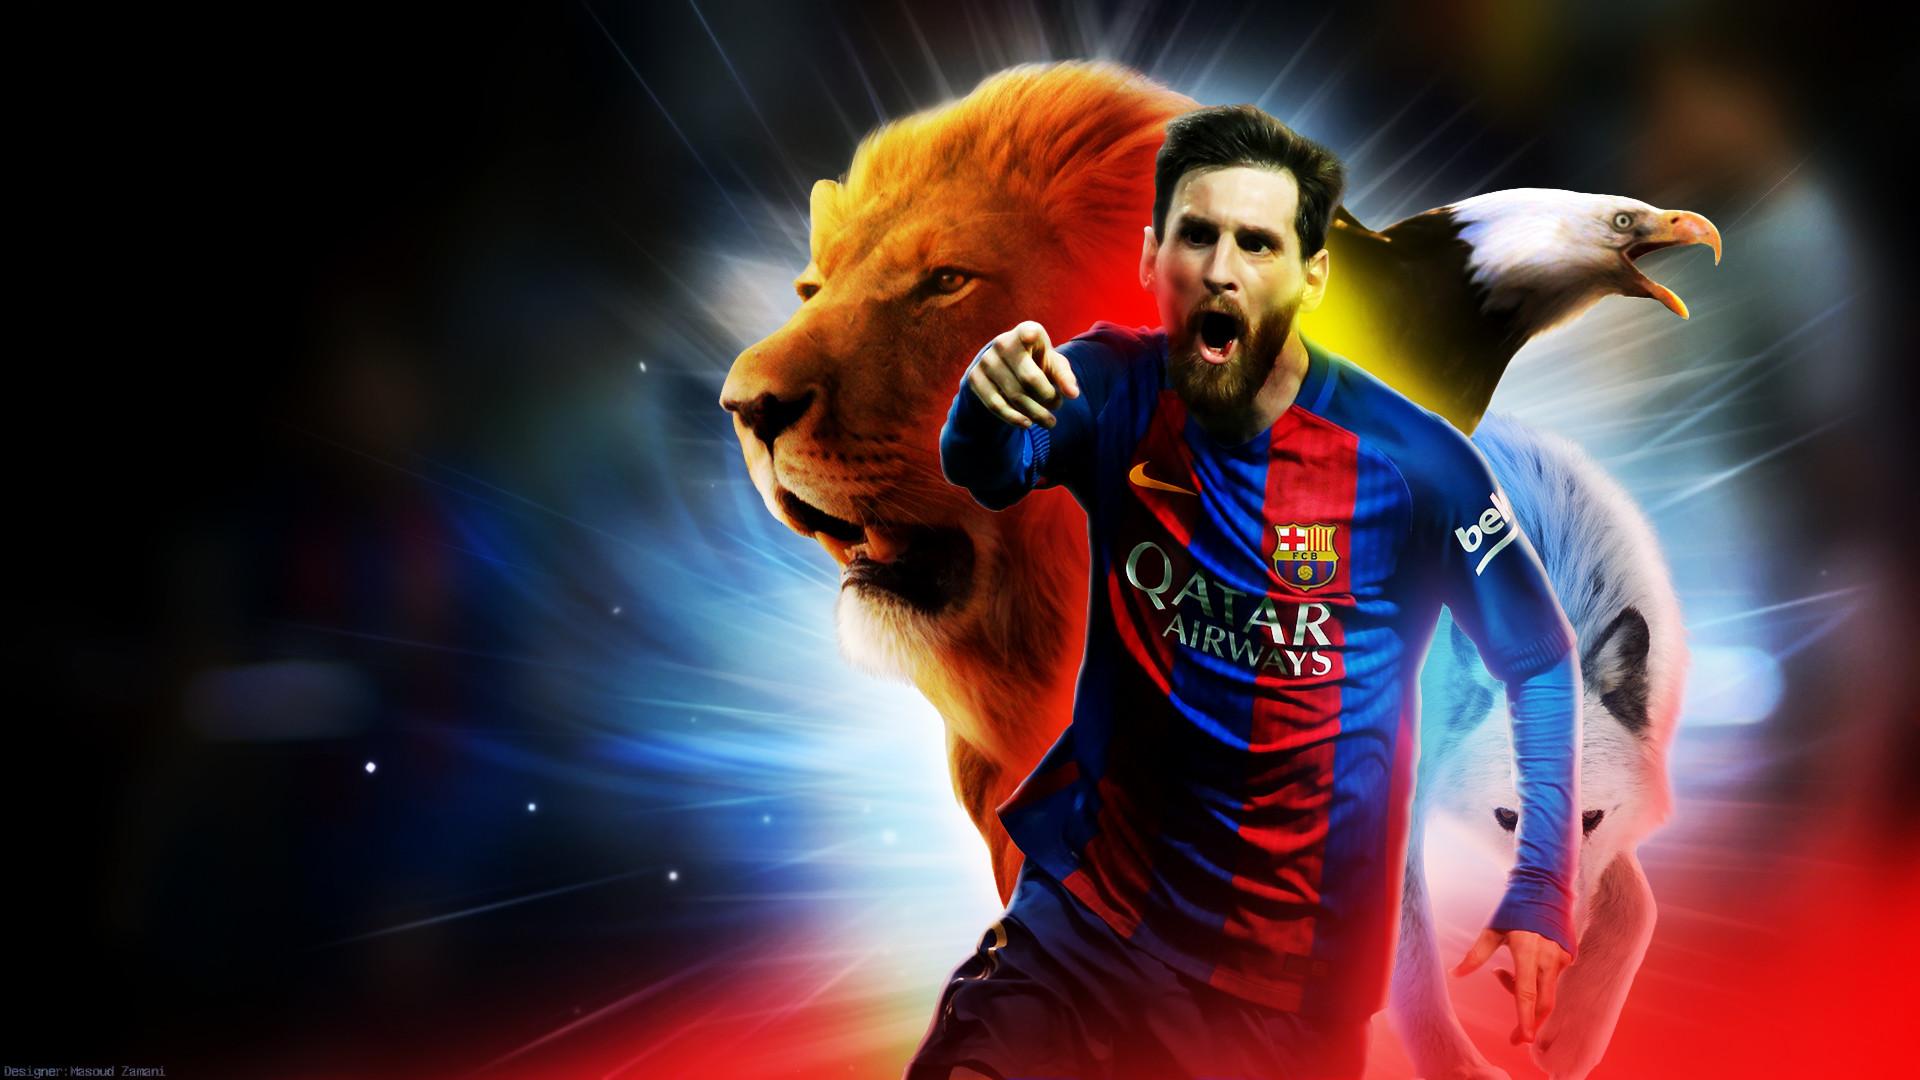 Messi Wallpapers - Top Free Messi Backgrounds ...